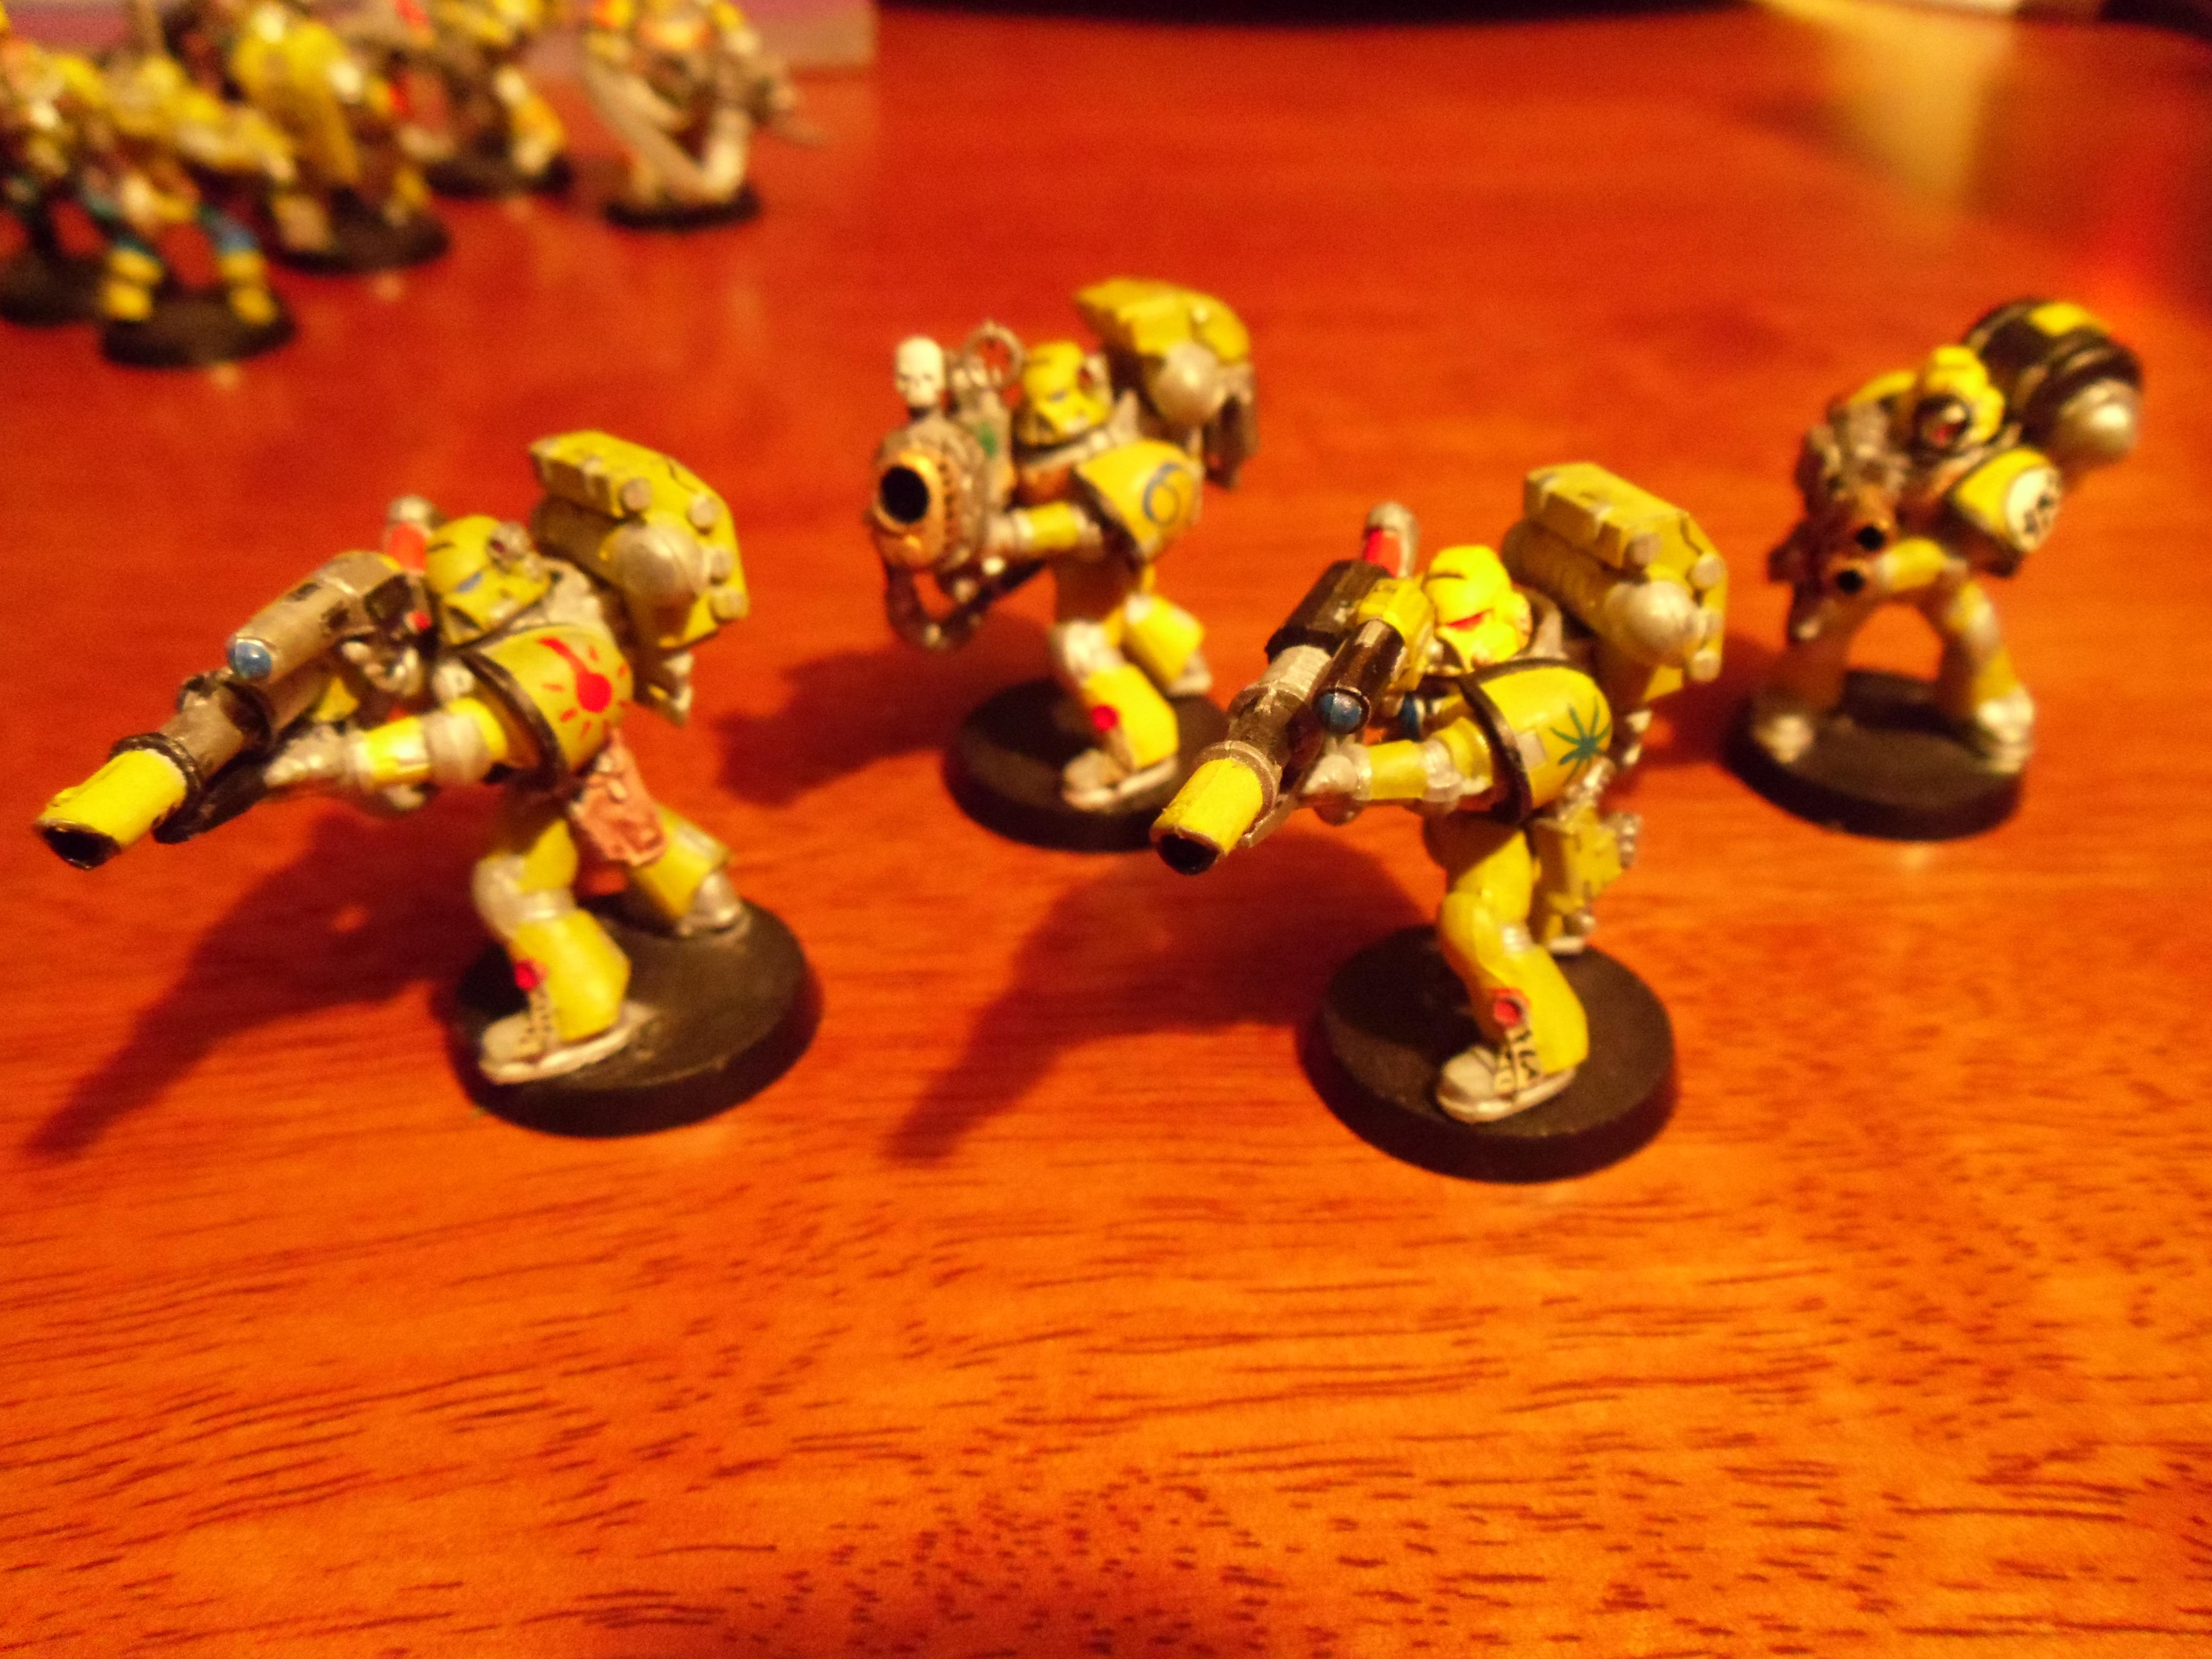 Imperial Fists, Space Marines, Vengeance